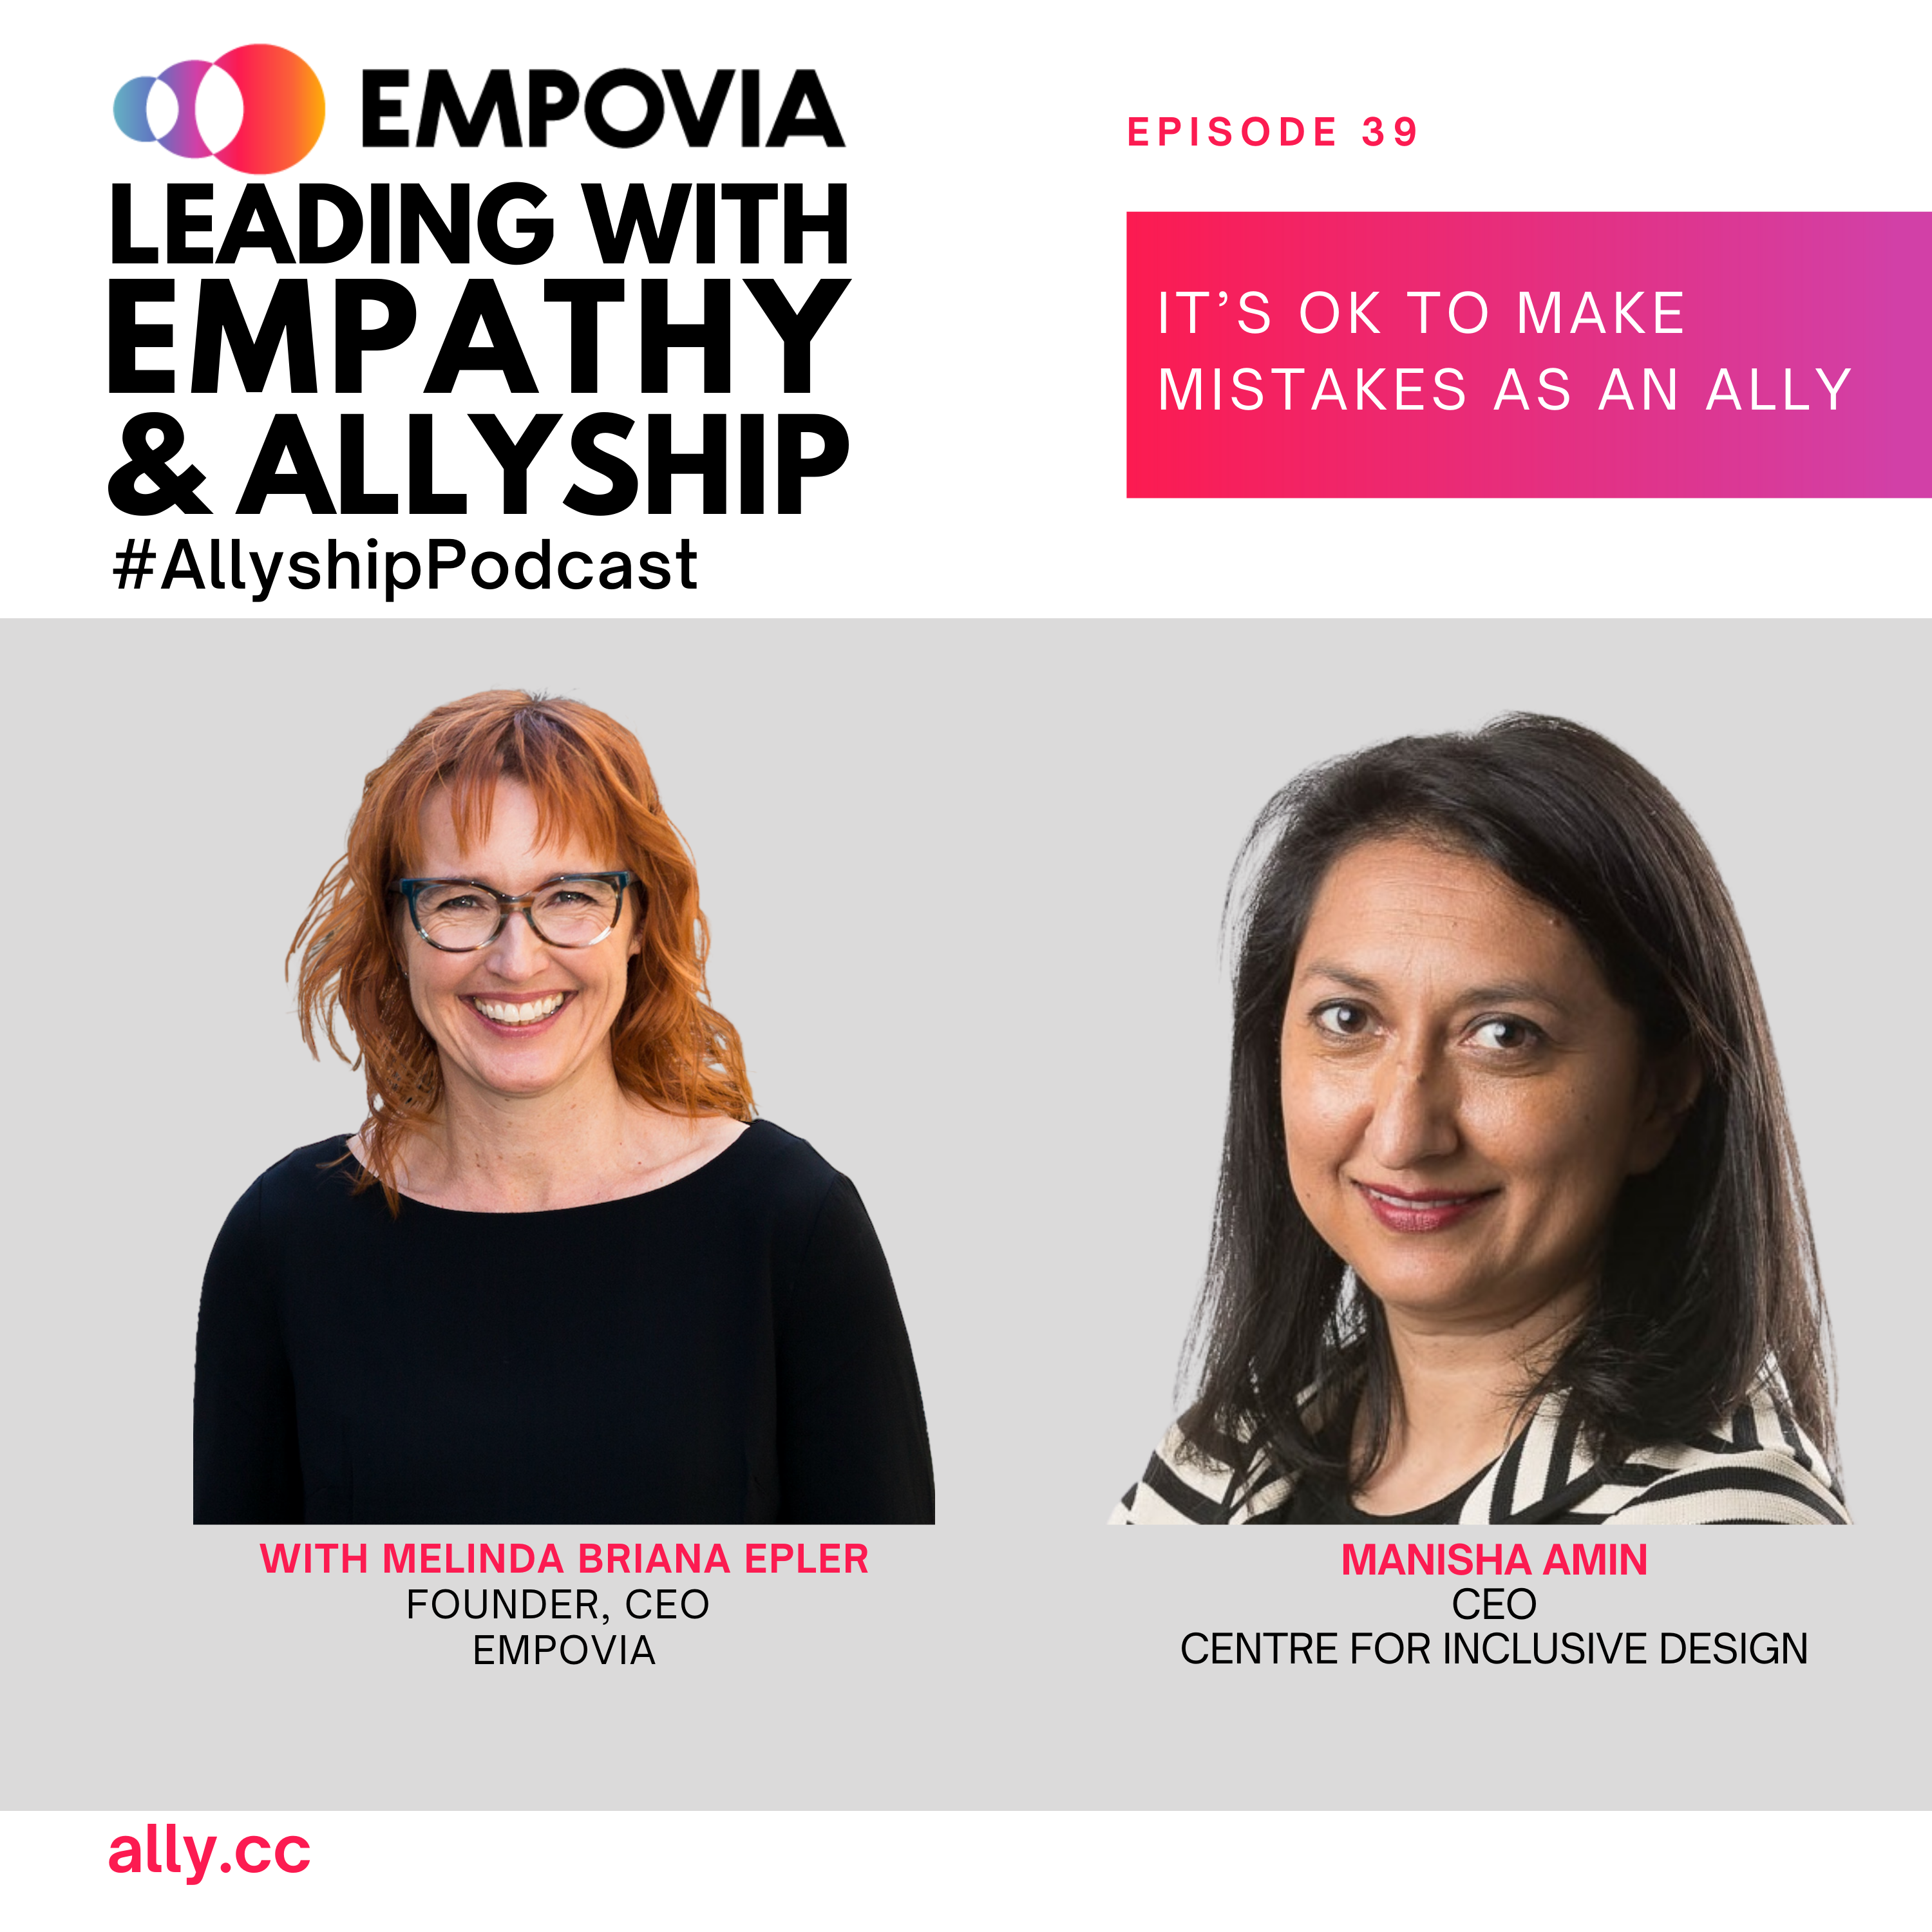 Leading With Empathy & Allyship promo with the Empovia logo and photos of host Melinda Briana Epler, a White woman with red hair and glasses, and Manisha Amin, an Indian woman with dark hair and striped jacket.